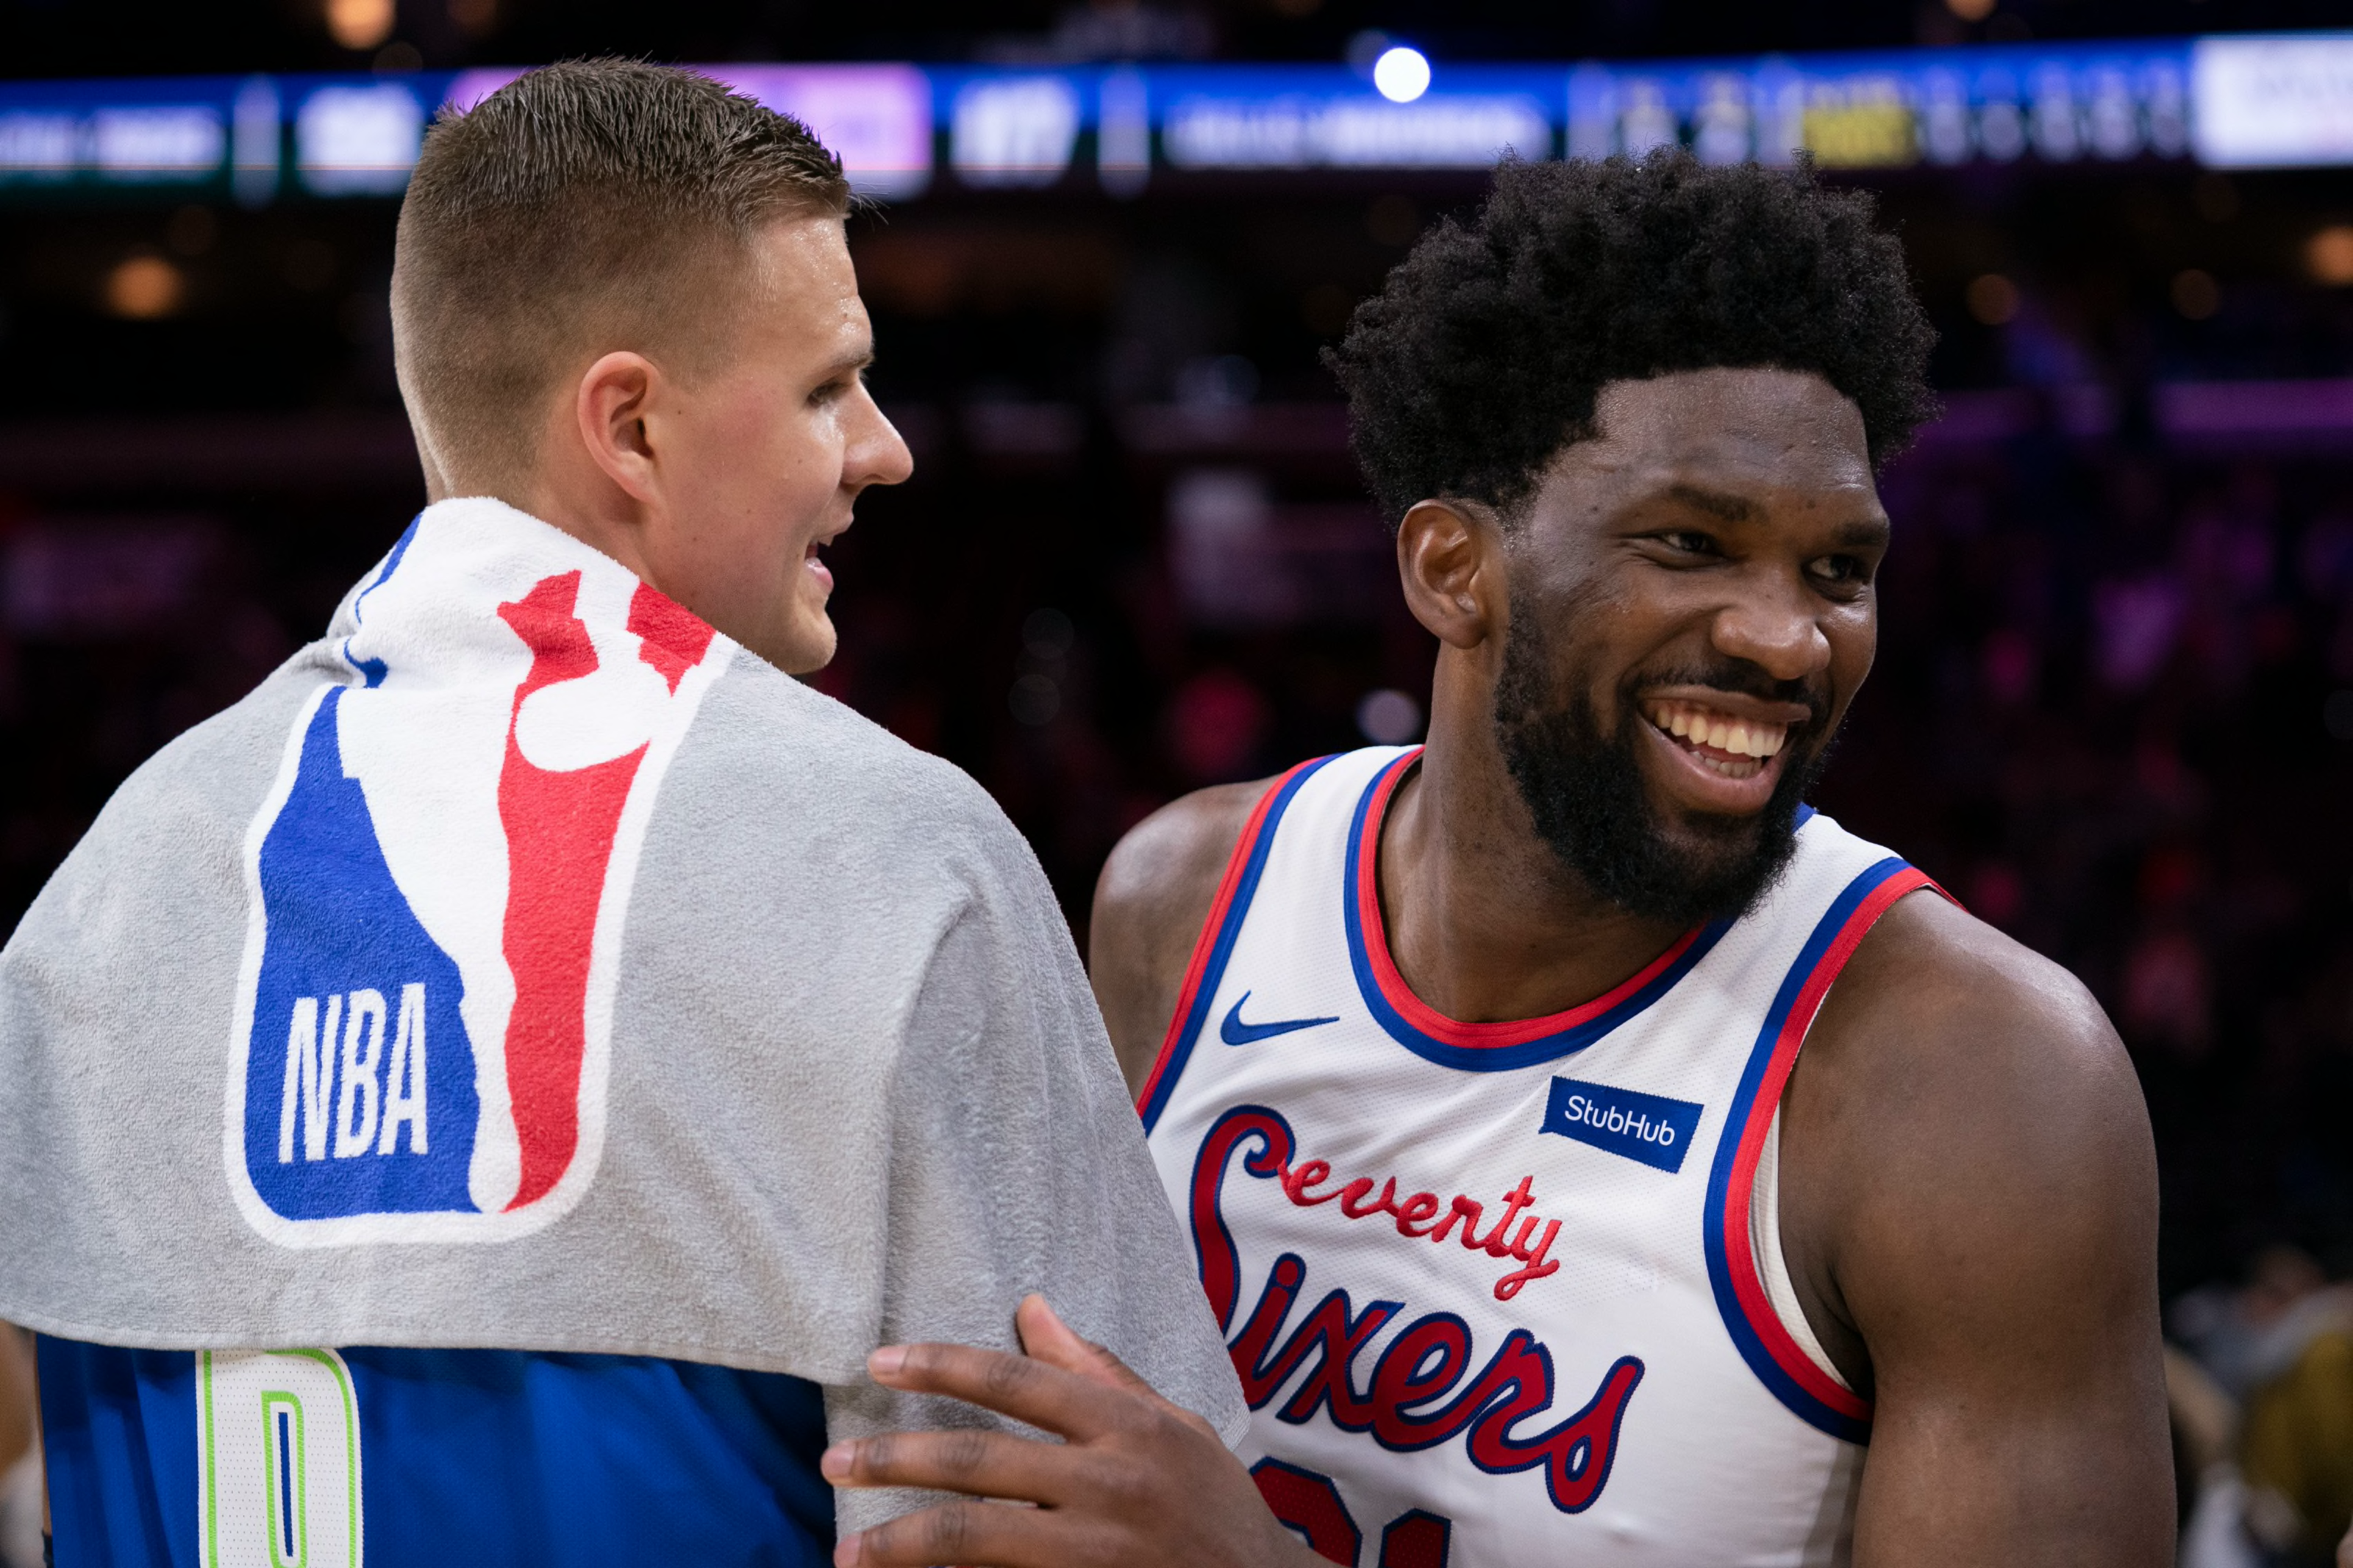 Sixers vs. Mavericks 5 things to watch for in final Orlando scrimmage